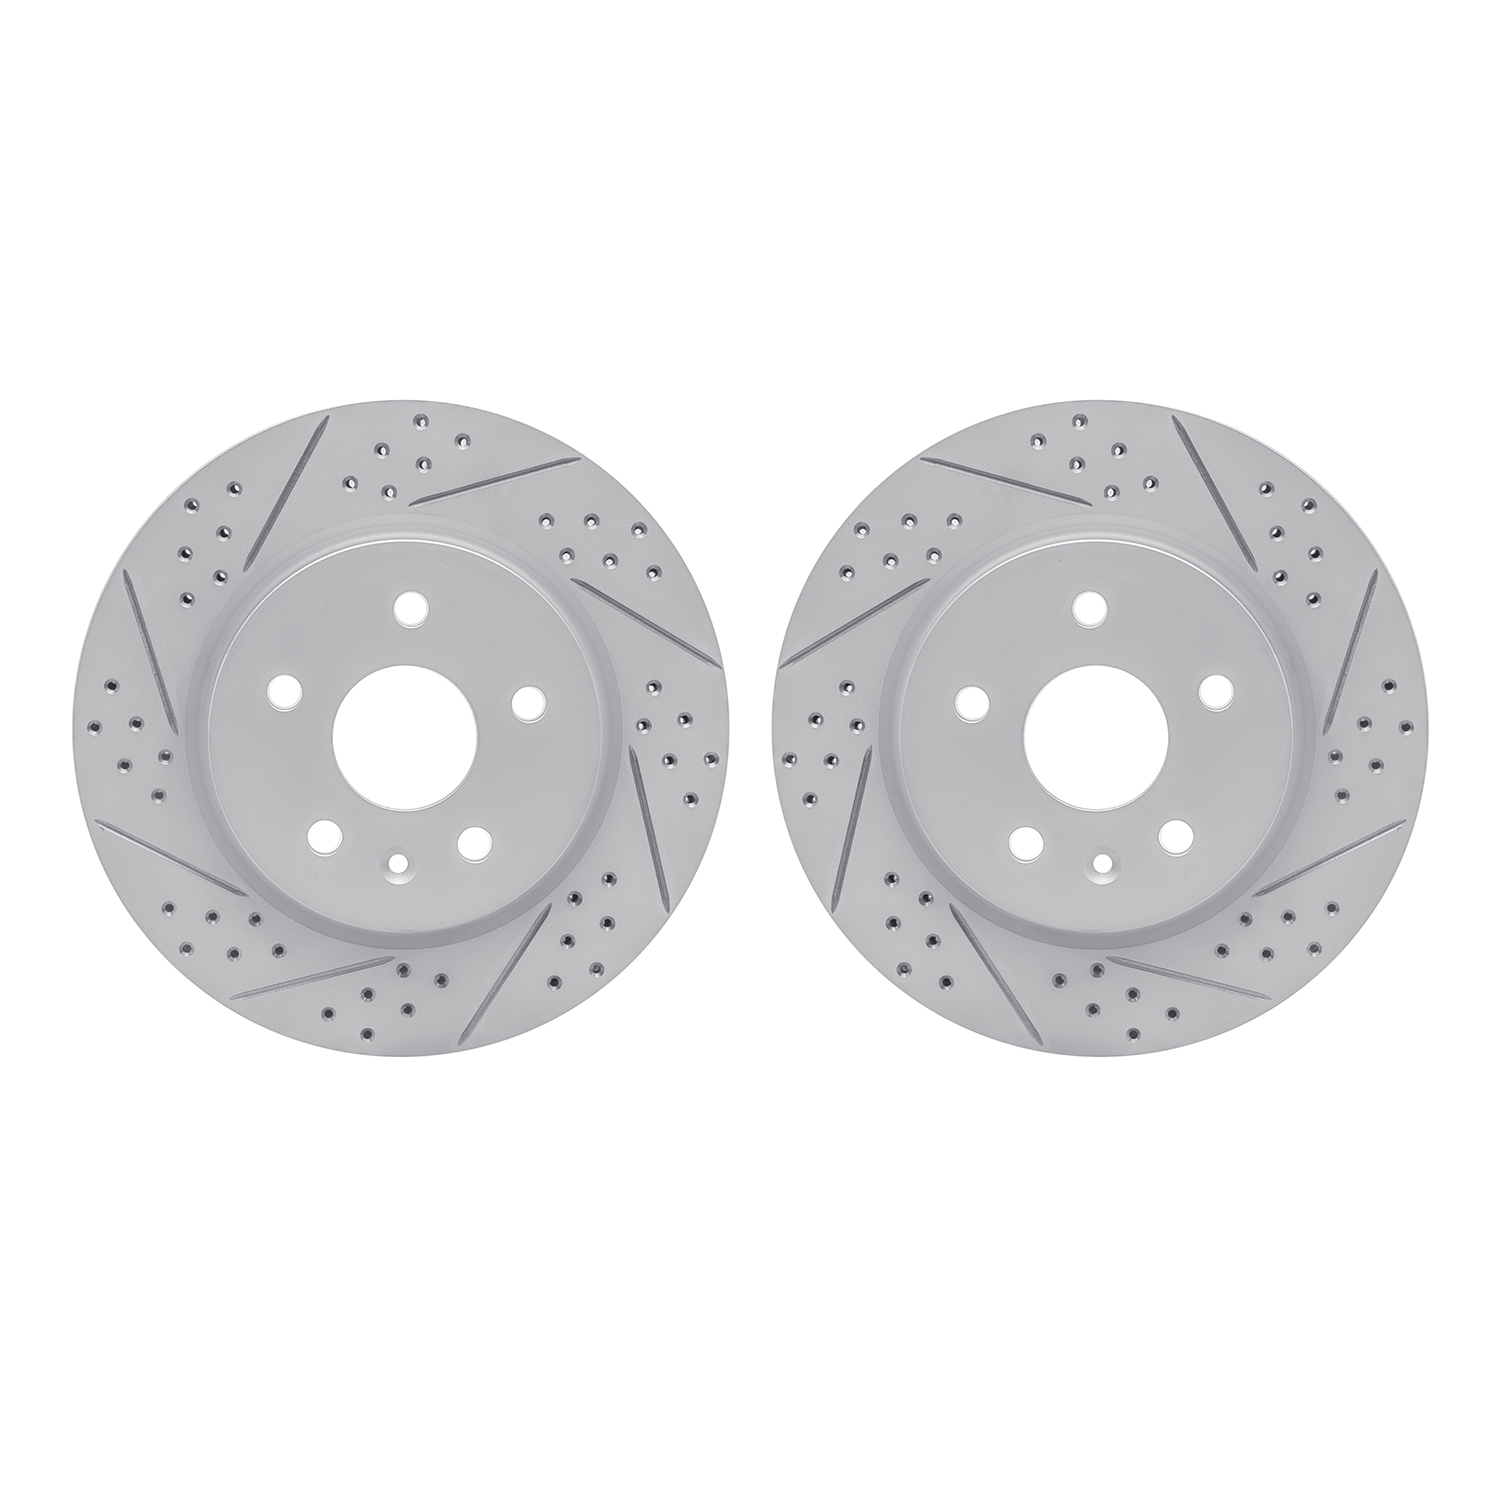 2002-65008 Geoperformance Drilled/Slotted Brake Rotors, Fits Select GM, Position: Rear